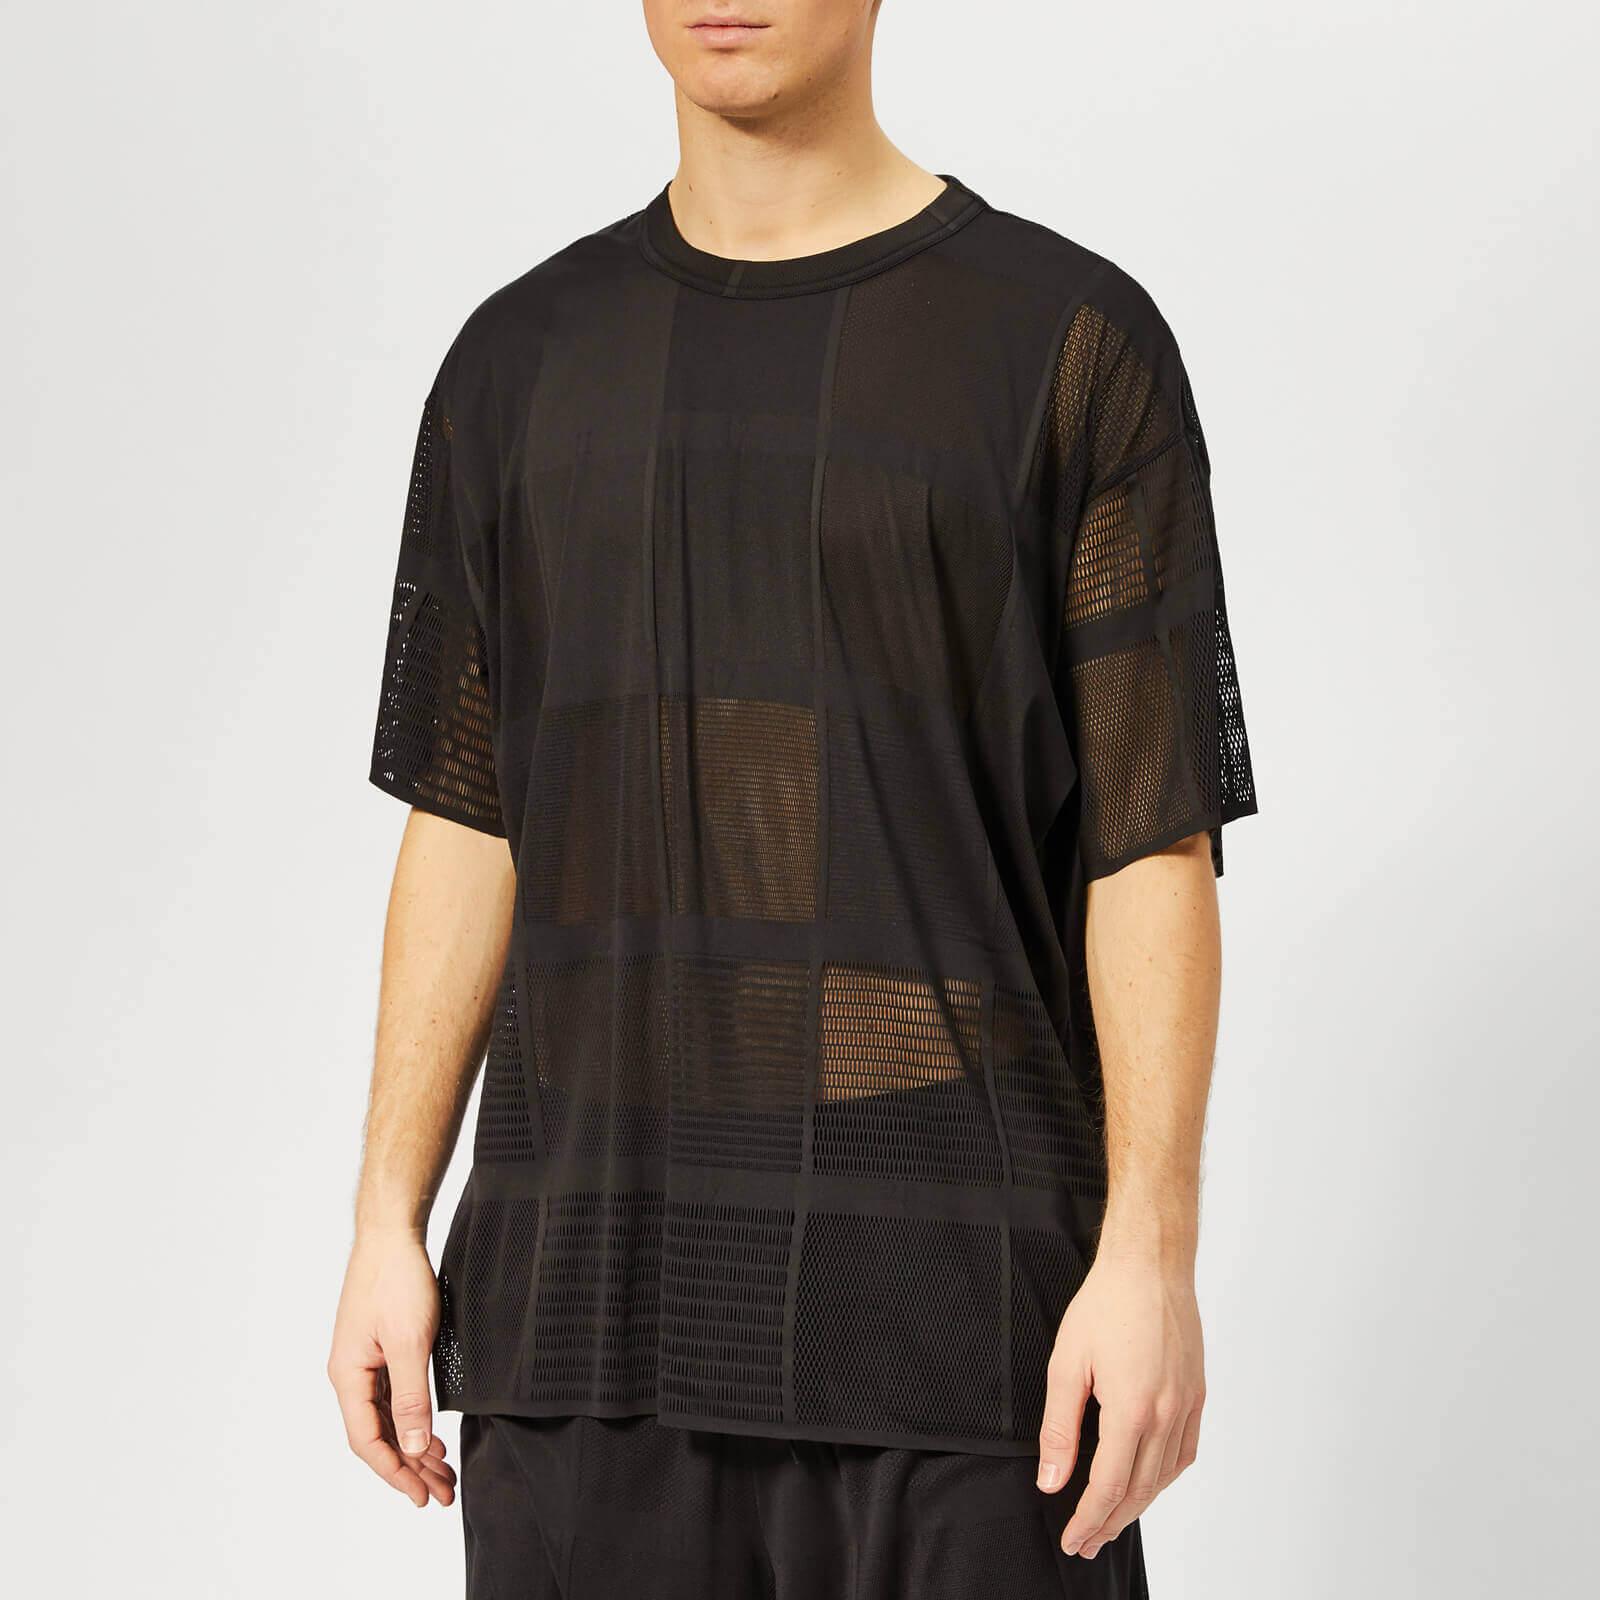 Y-3 Synthetic Patchwork Mesh Short Sleeve T-shirt in Black for Men - Lyst